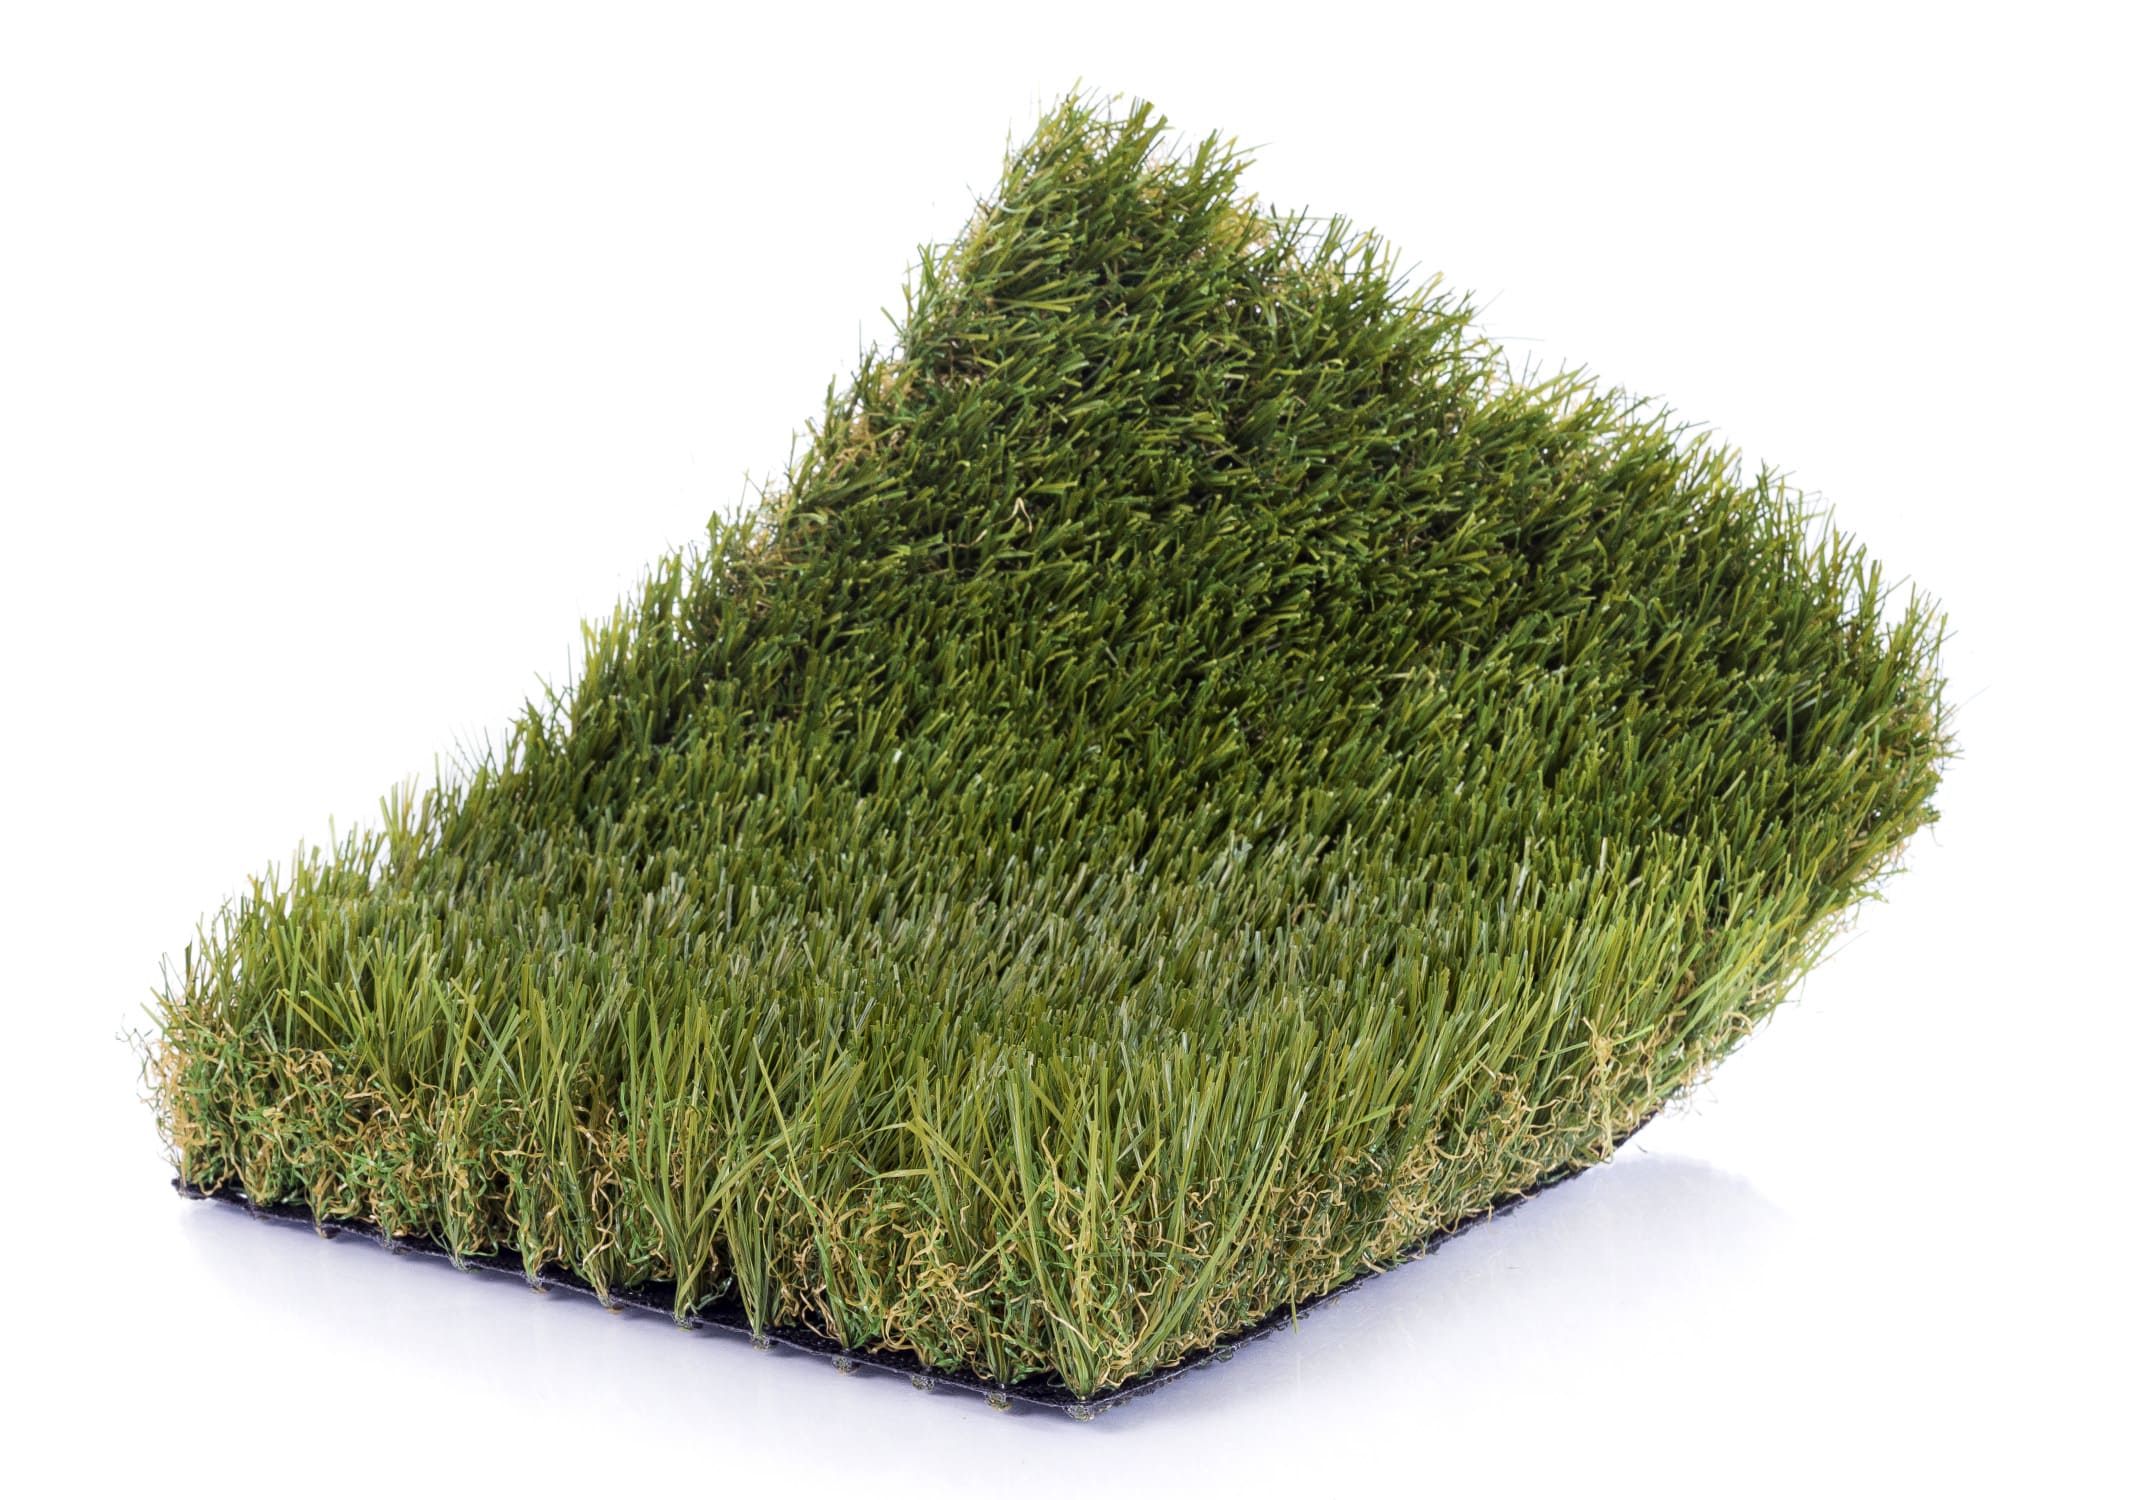 Absolute-artificial-turf-01-1